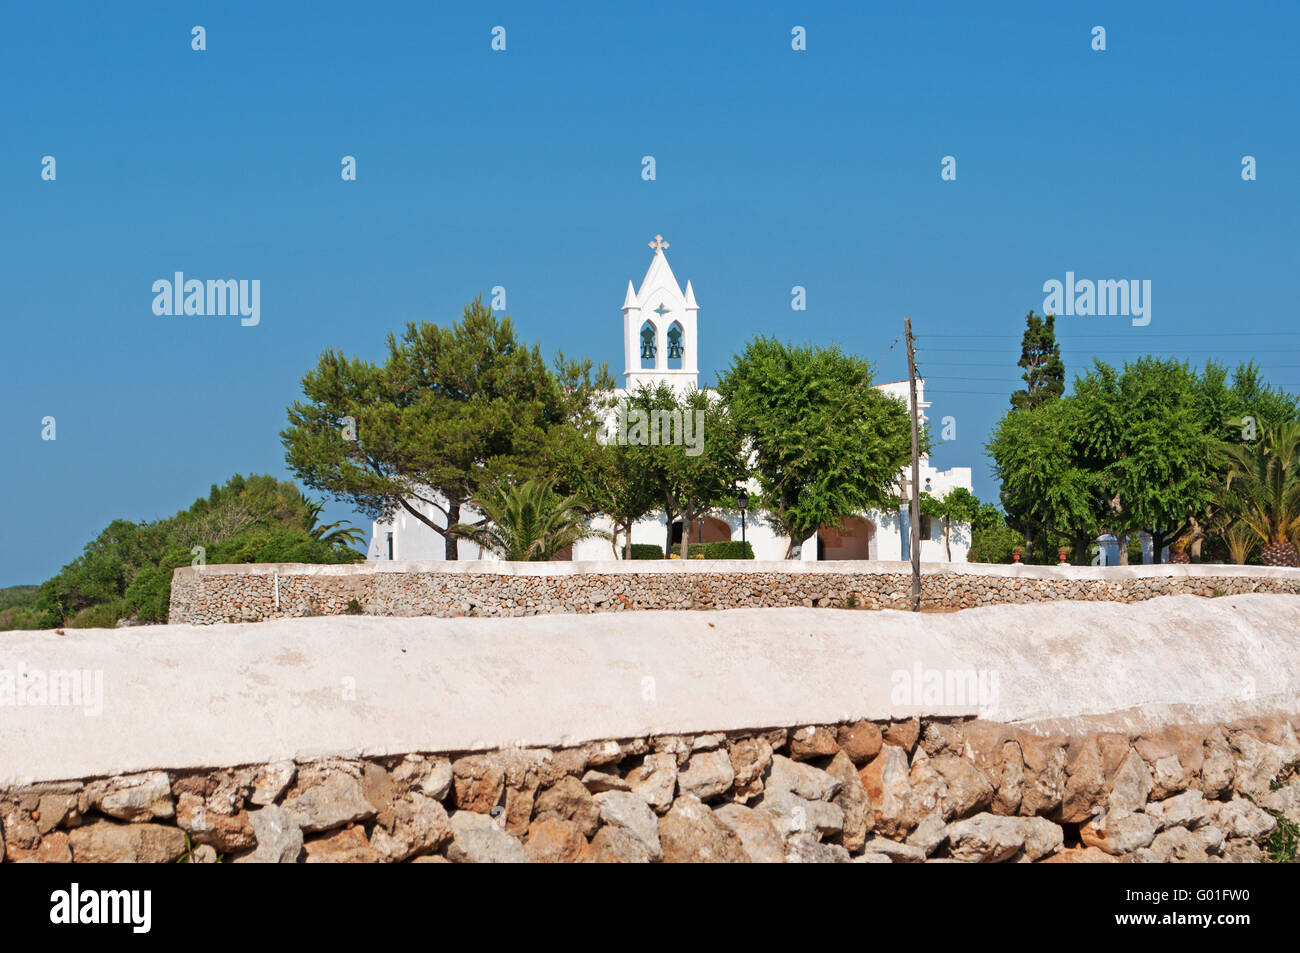 Menorca, Balearic Islands, Spain, Europe: a stone wall and a white church in the menorcan countryside Stock Photo